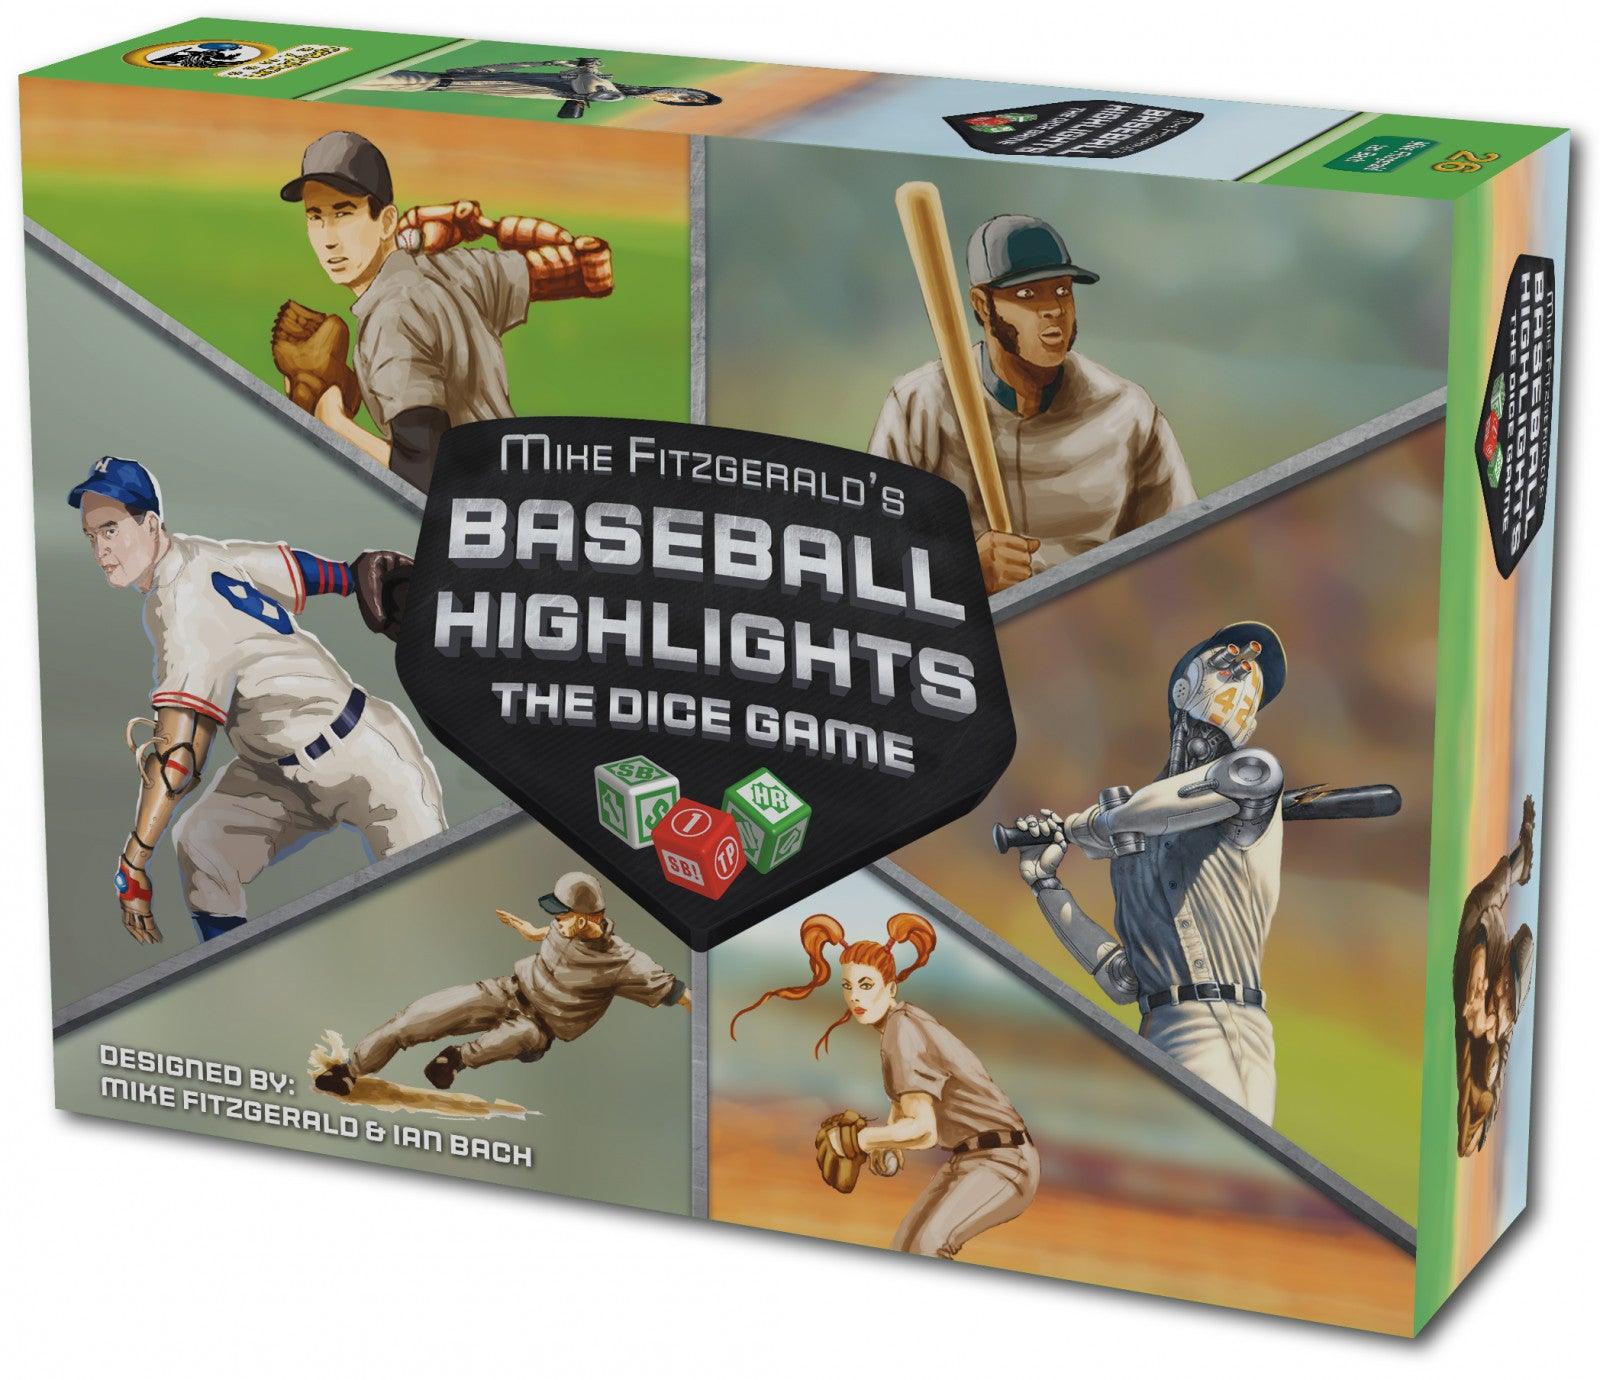 VR-90808 Baseball Highlights The Dice Game - Eagle Gryphon Games - Titan Pop Culture